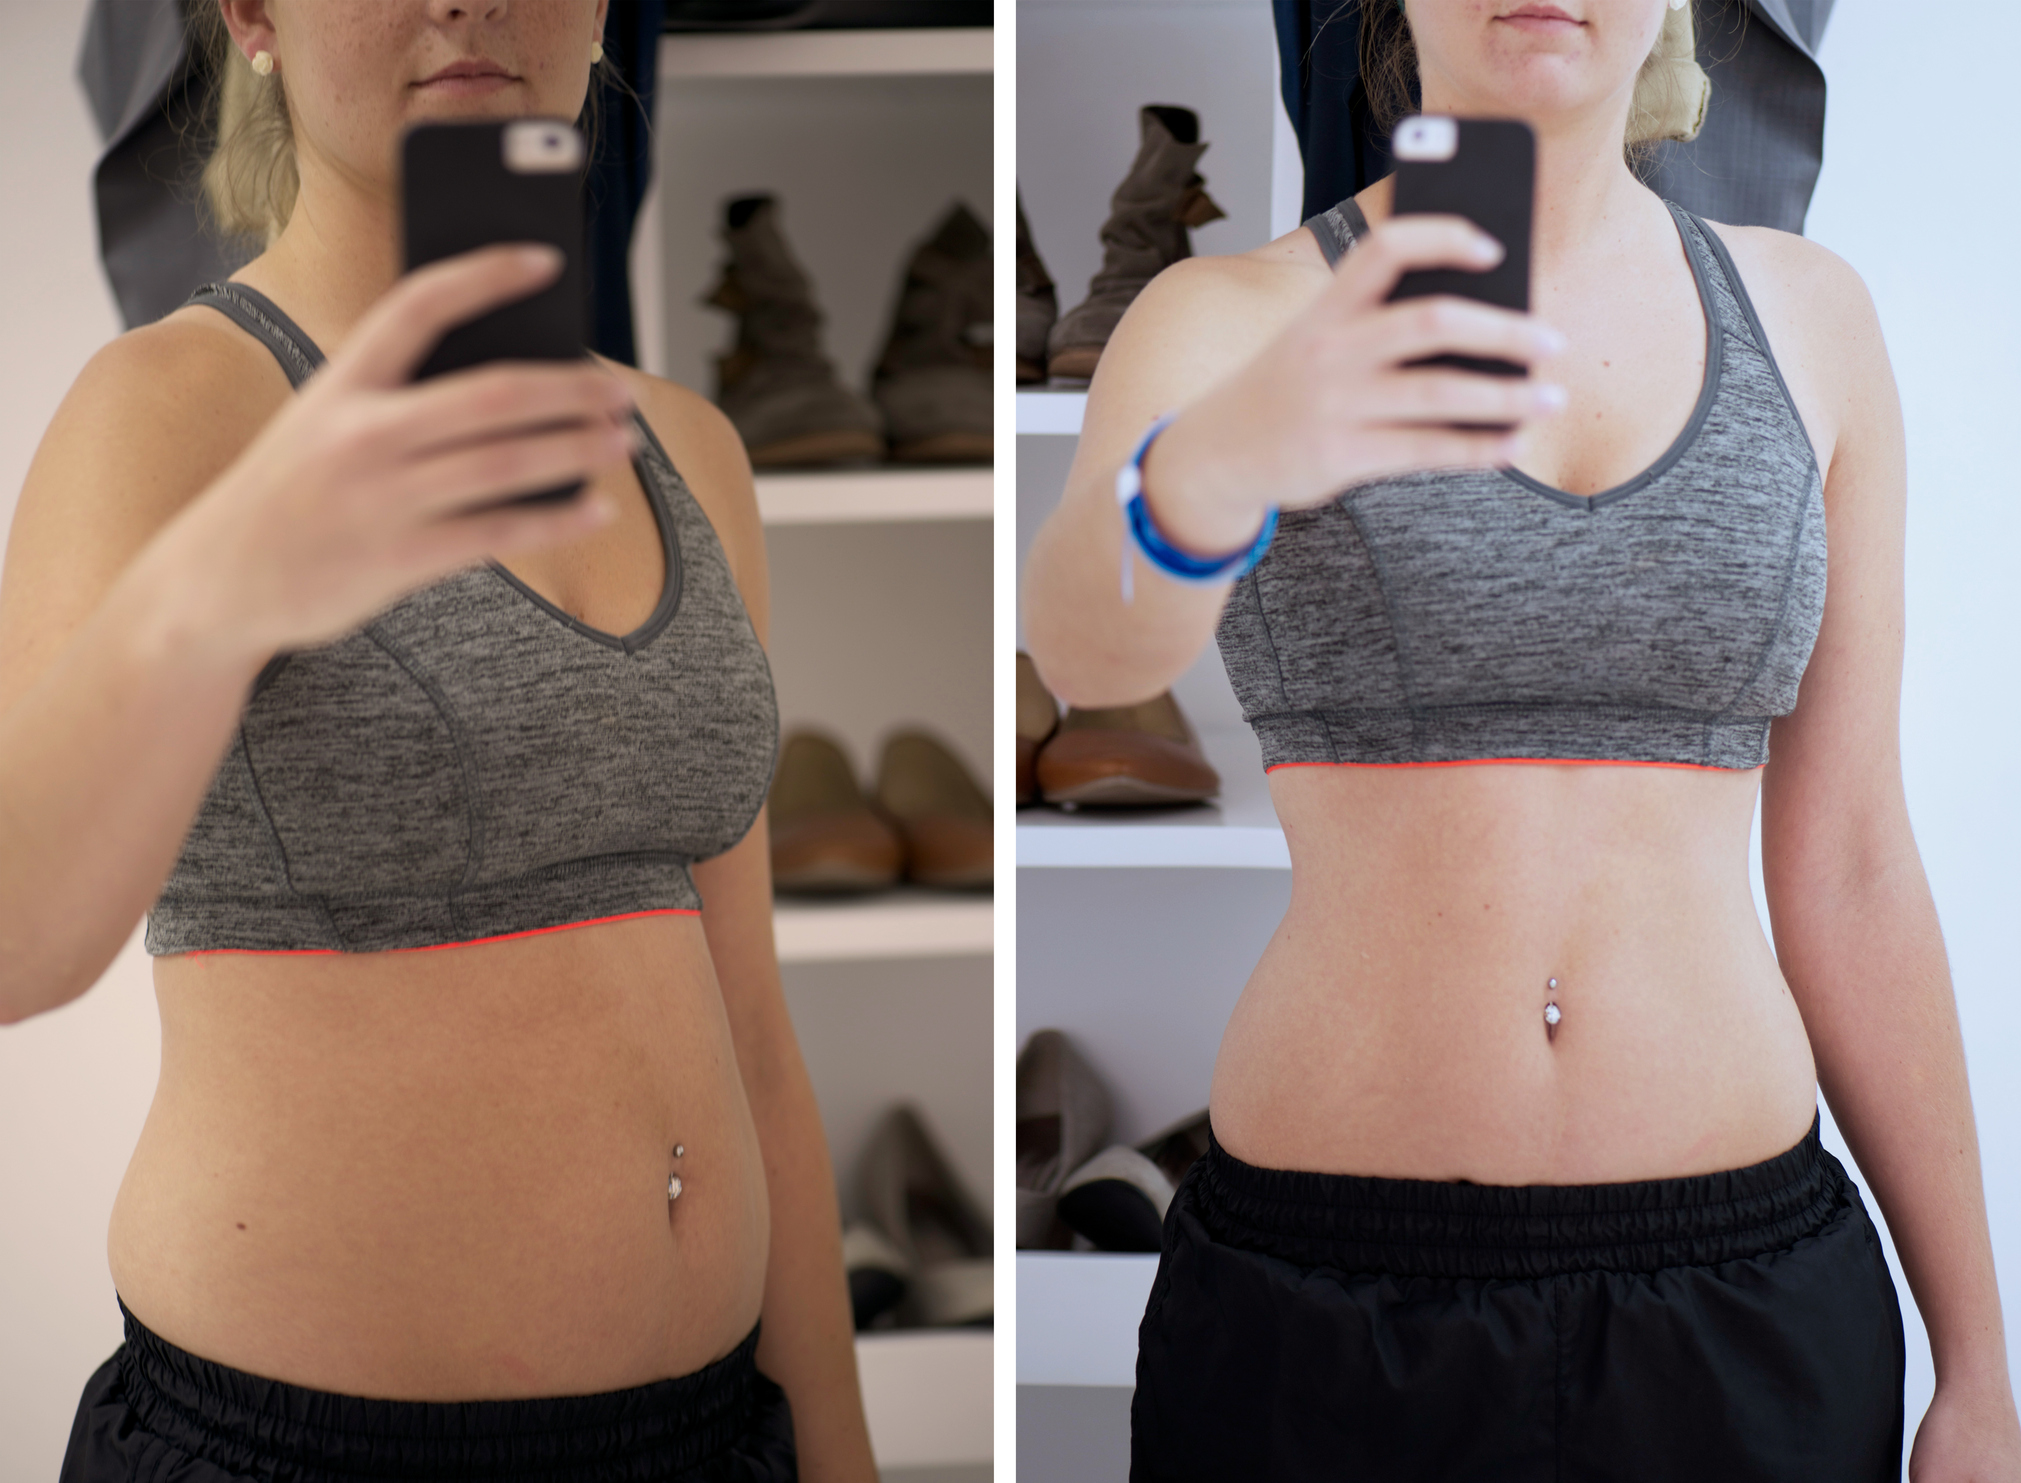 Before and after selfies of a young woman tracking her progress